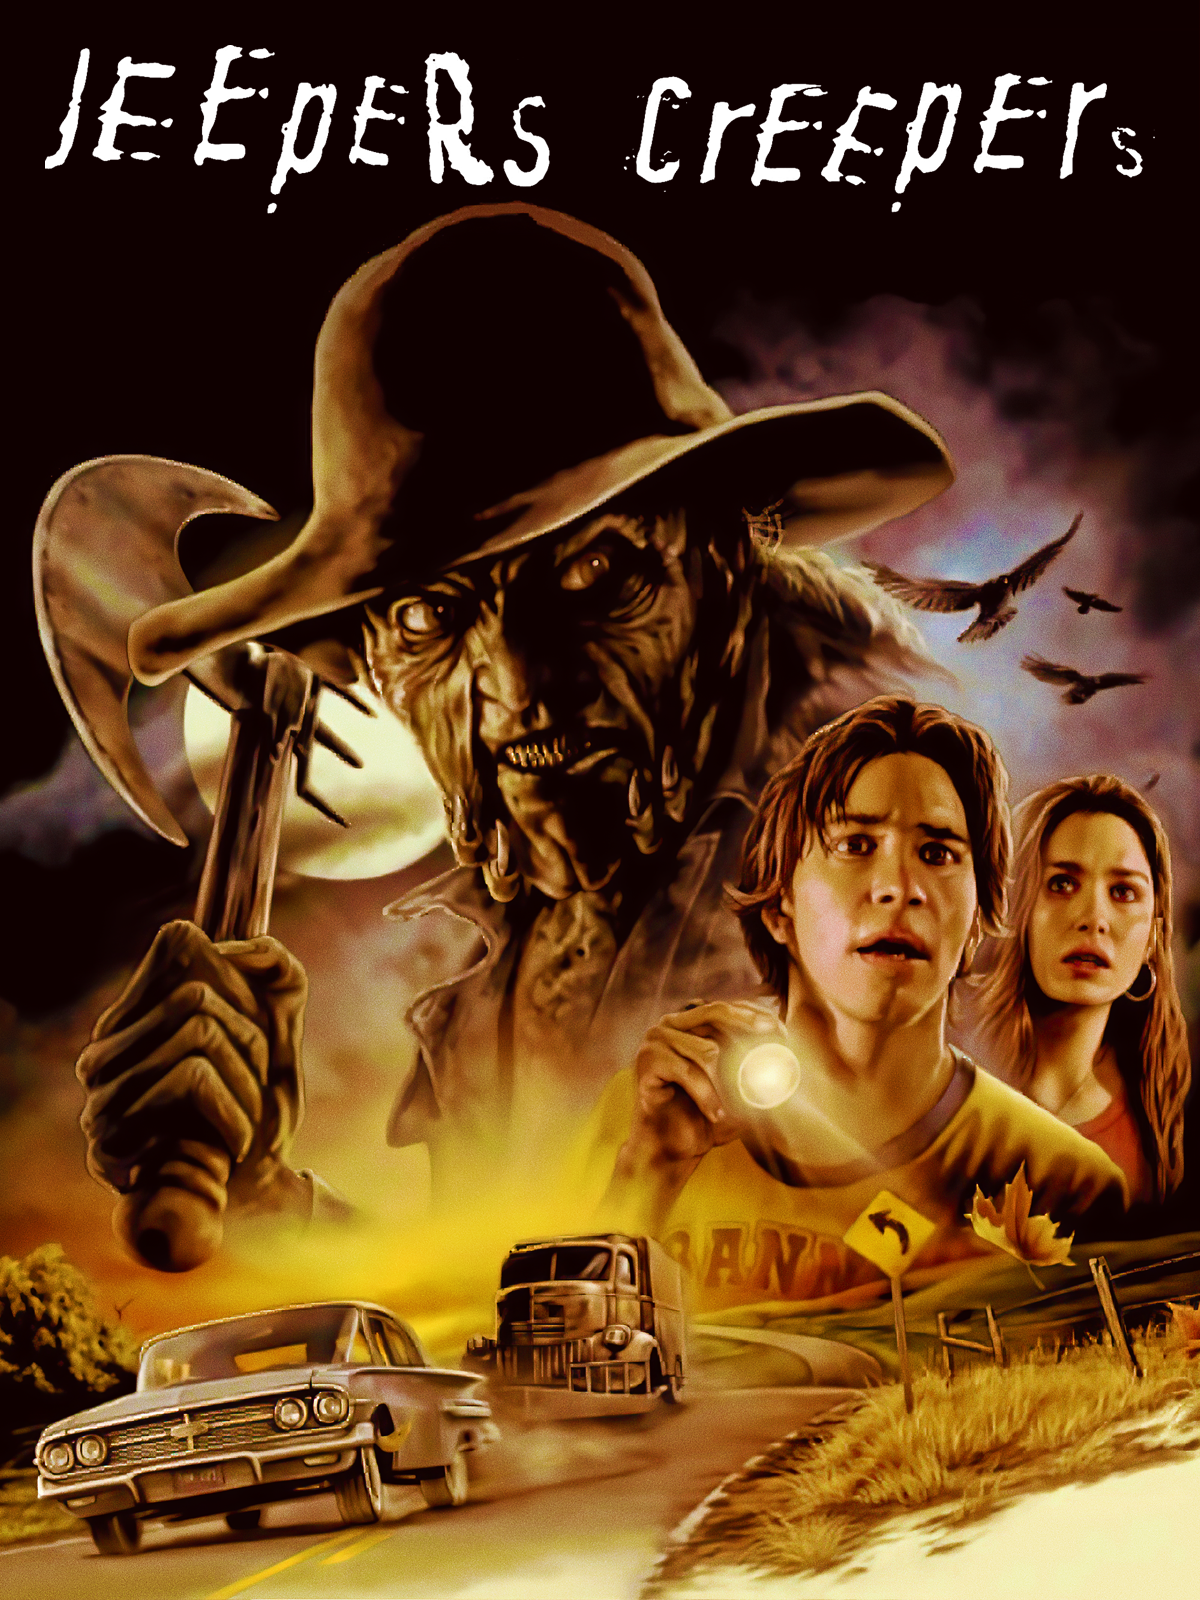 jeepers_amazon_3x4_cover_art_1200x1600